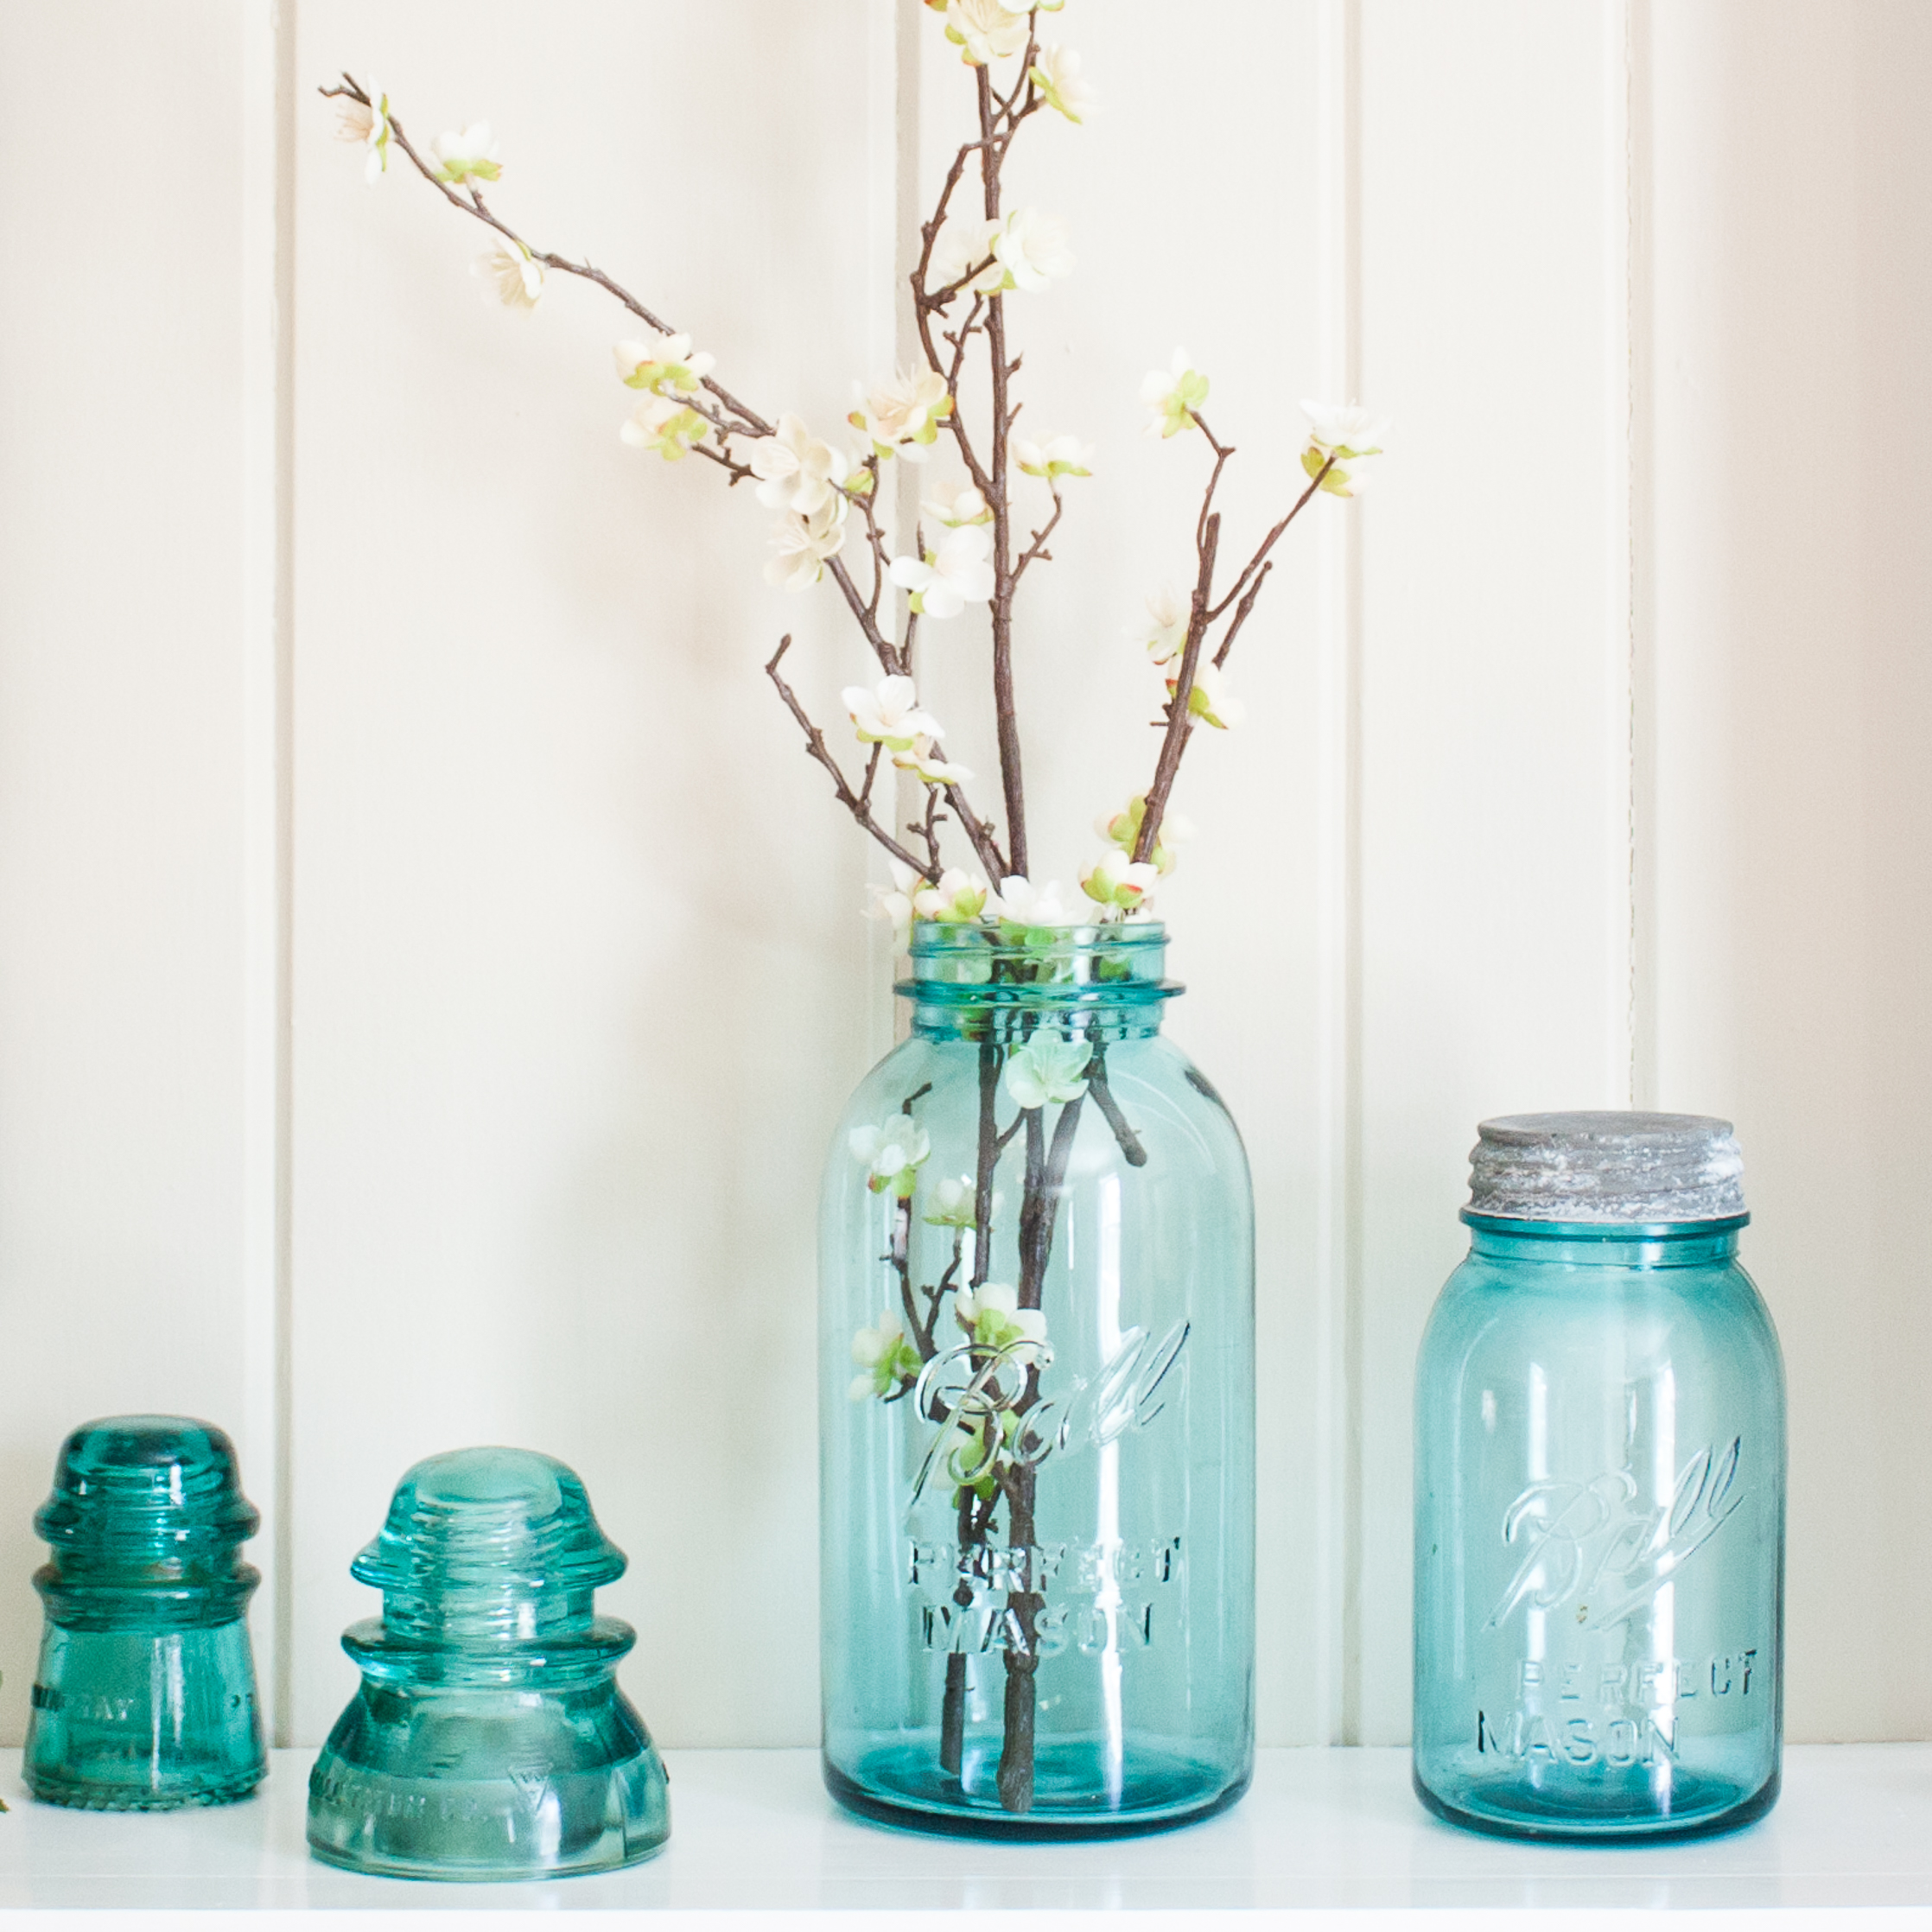 Spring Mantel with Vintage Ball Jars and Baskets